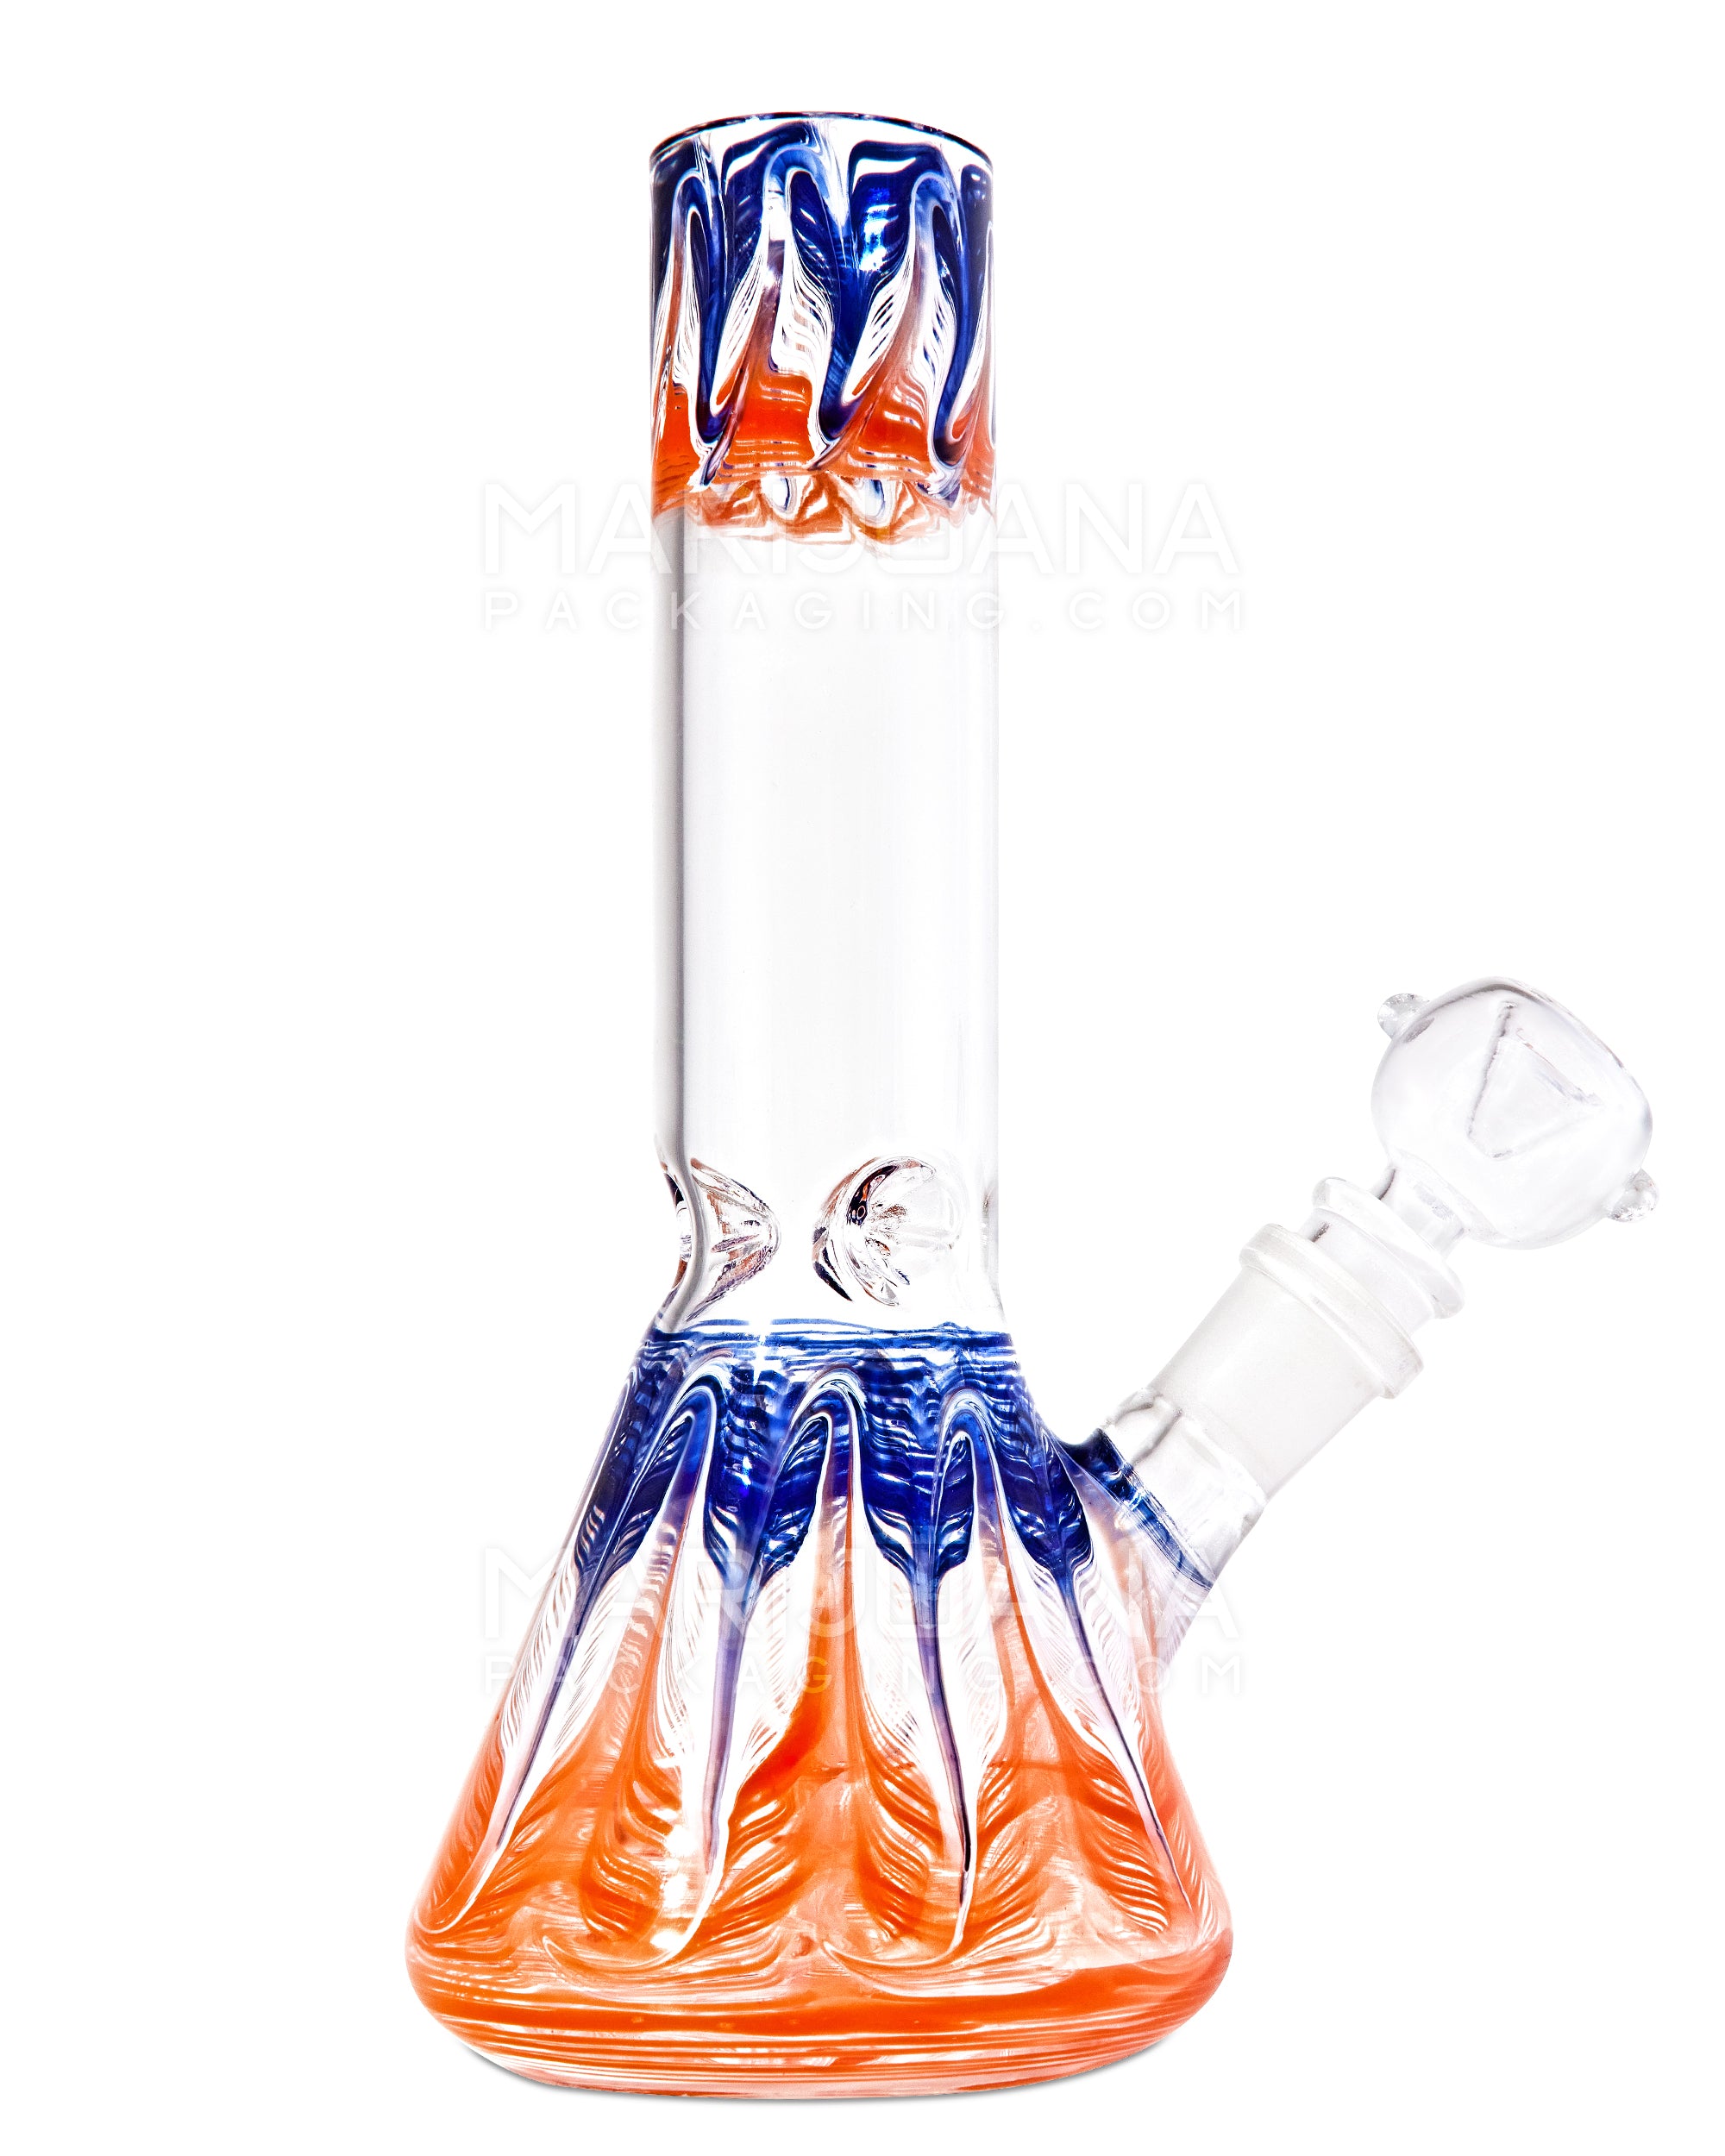 Straight Neck Raked Thick Glass Beaker Water Pipe w/ Ice Catcher | 8in Tall - 14mm Bowl - Assorted - 6